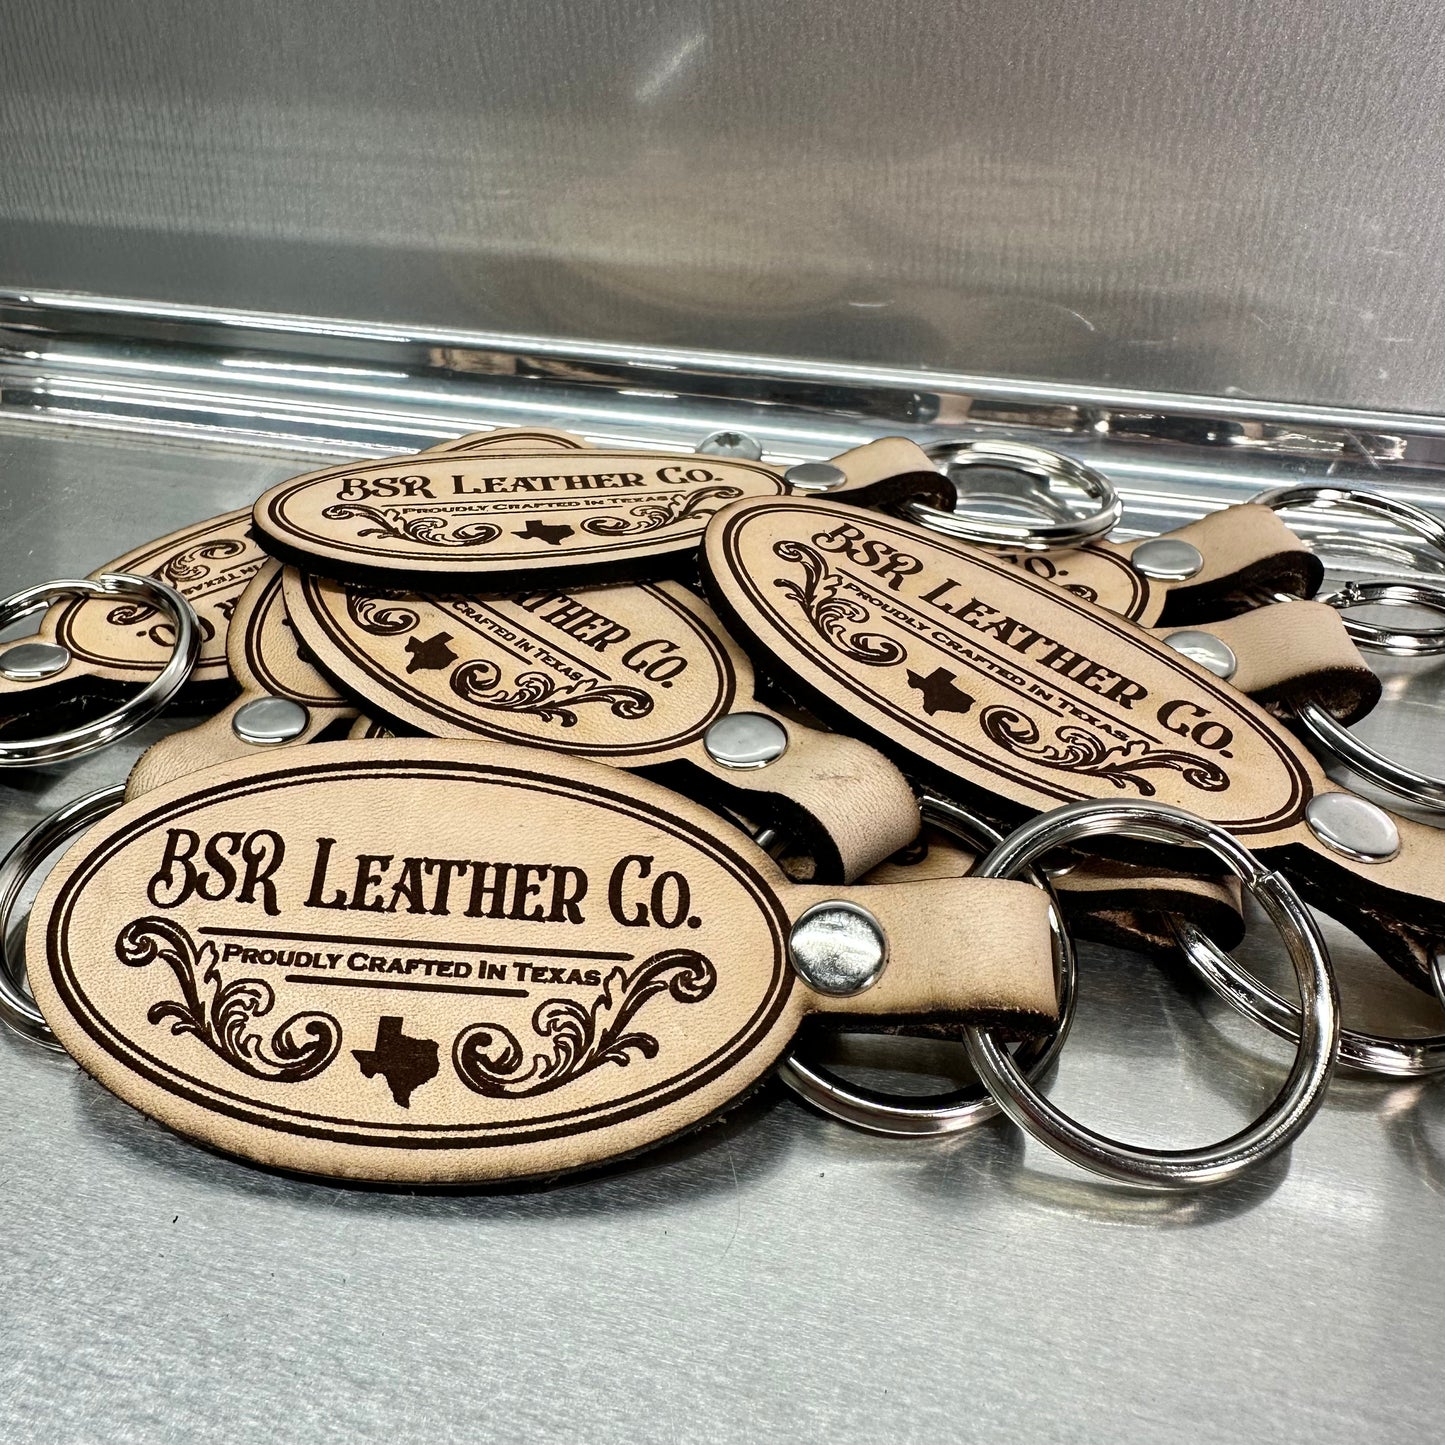 BSR Leather Co. Keychain